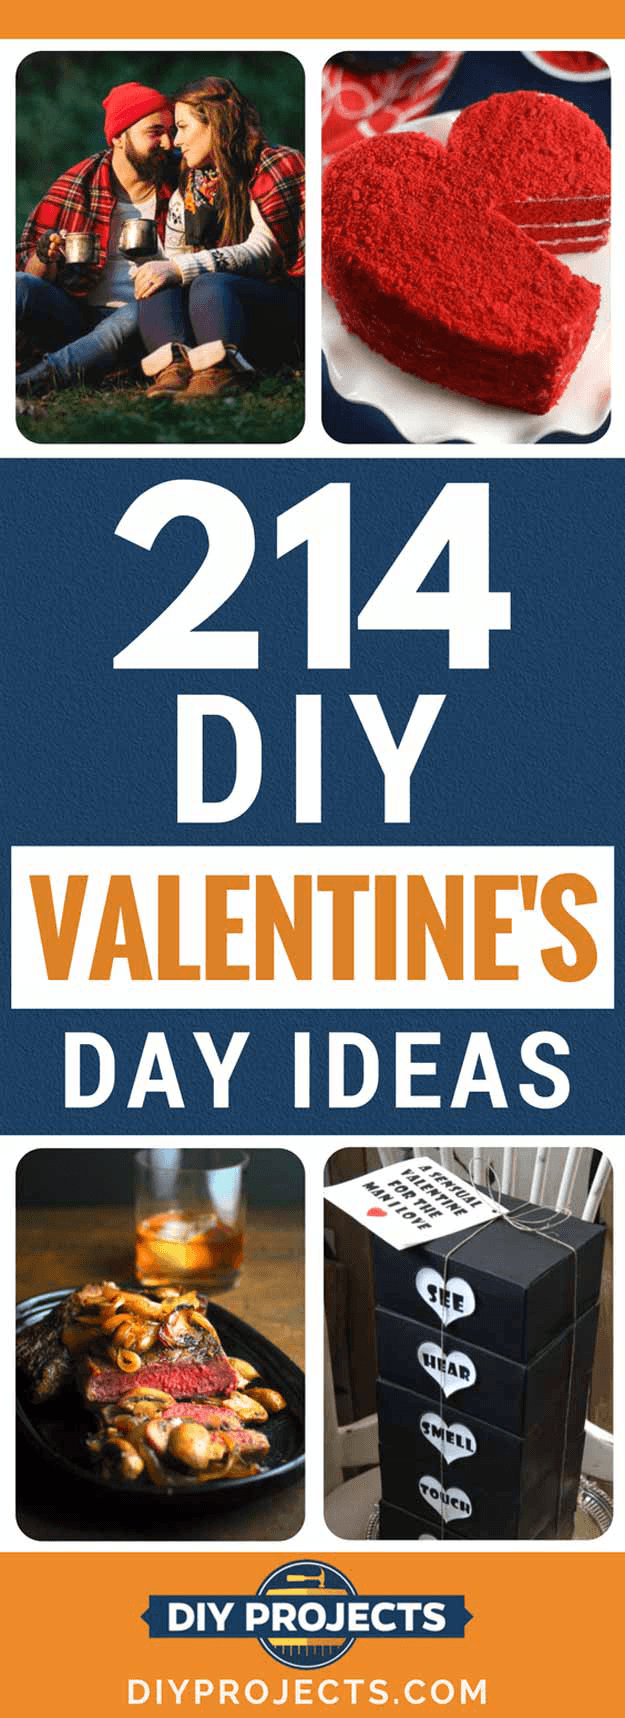 Check out 214 DIY Valentine's Day Ideas To Do With The Ones You Love at https://diyprojects.com/diy-valentines-day-ideas/